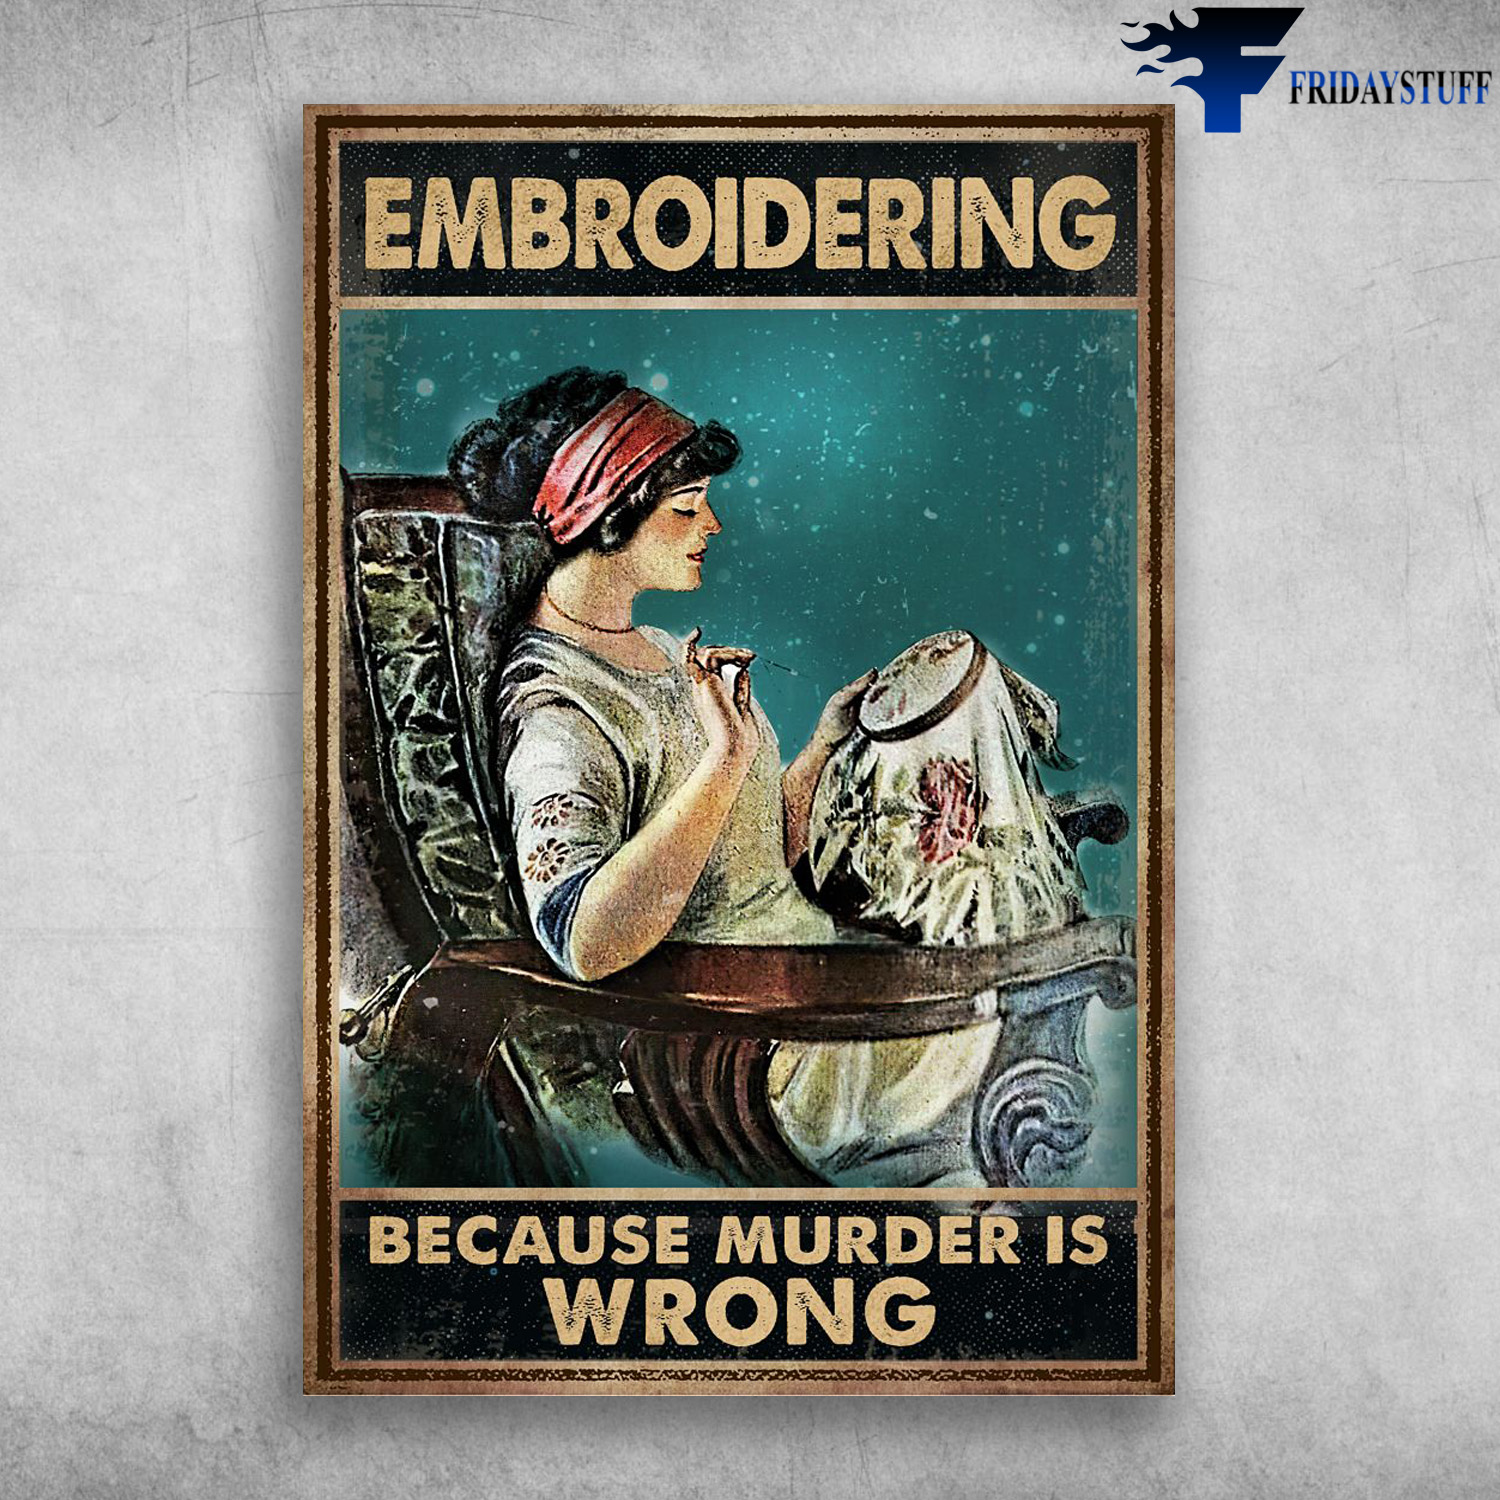 Lady Sewing - Embroidering, Because Murder Is Wrong